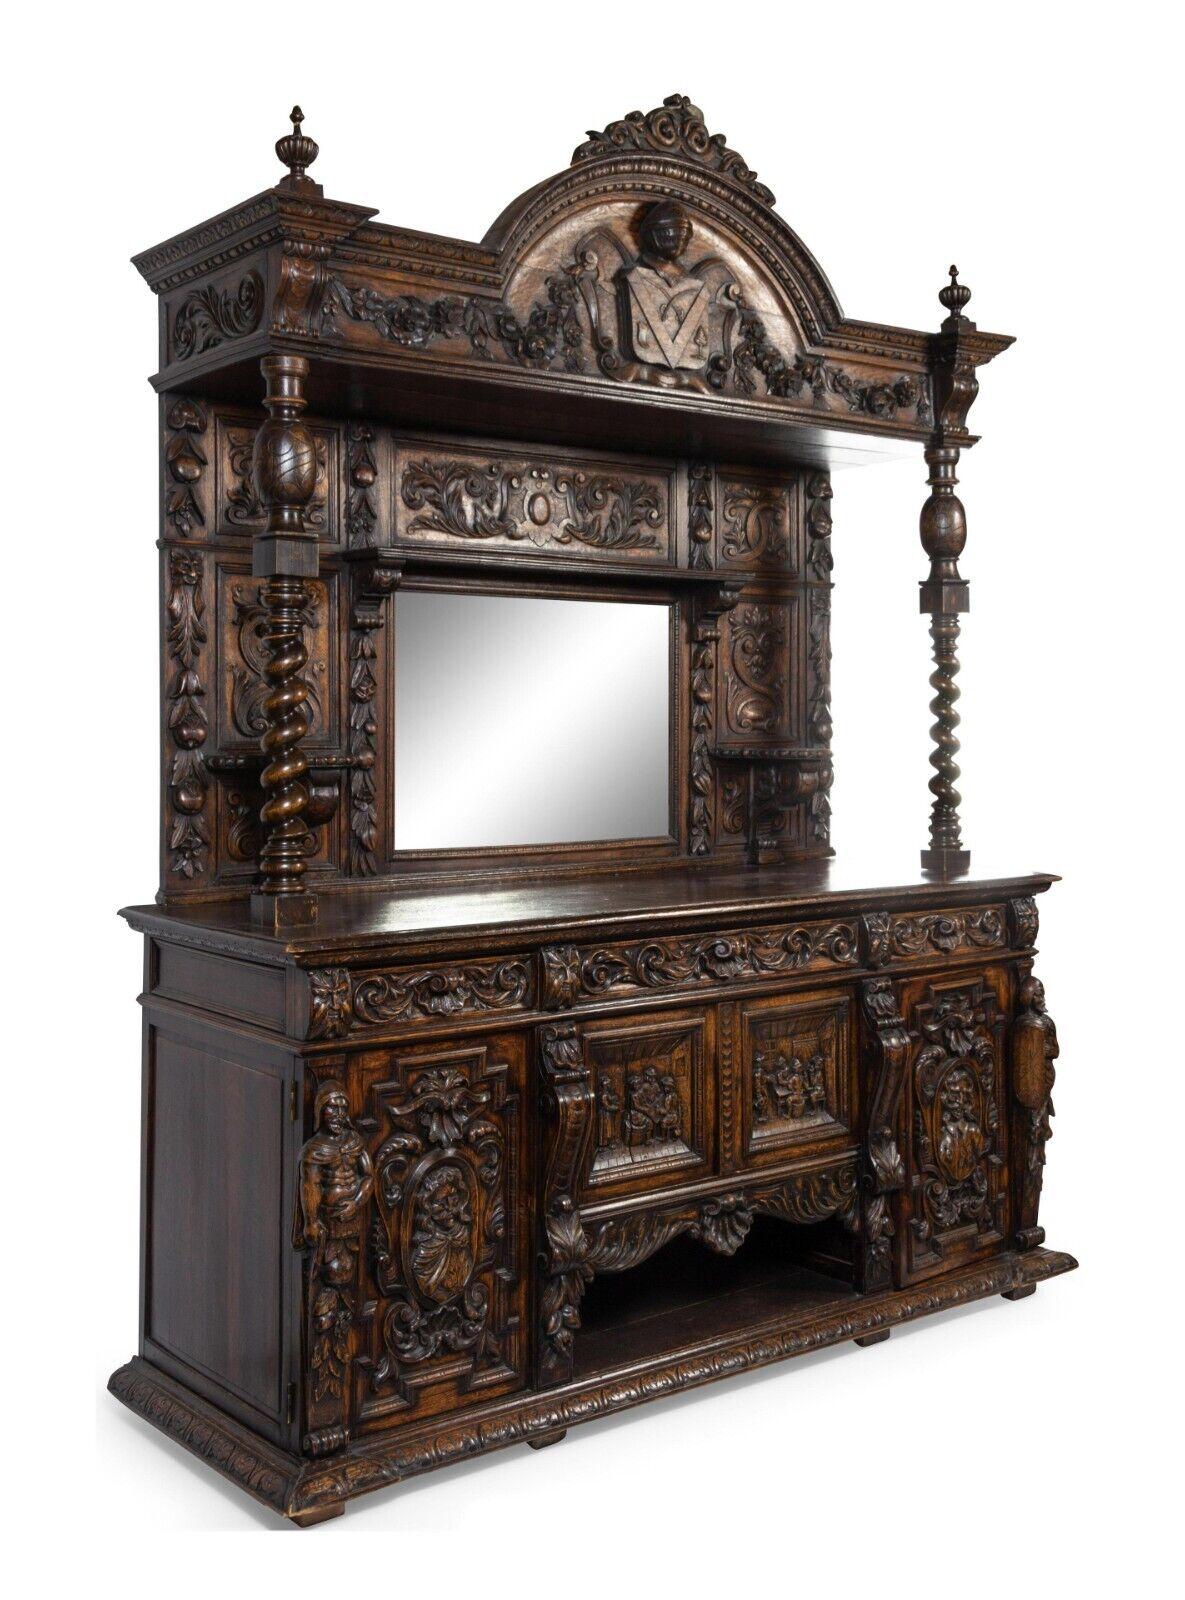 Stunning Antique Server, Sideboard, Renaissance Revival Carved Oak, Mirror, 19th century, 1800s!!

A Renaissance Revival Carved Oak Server, Late 19th Century Height 111 x width 85 x depth 29 1/2 inches.

Wear and imperfections commensurate with